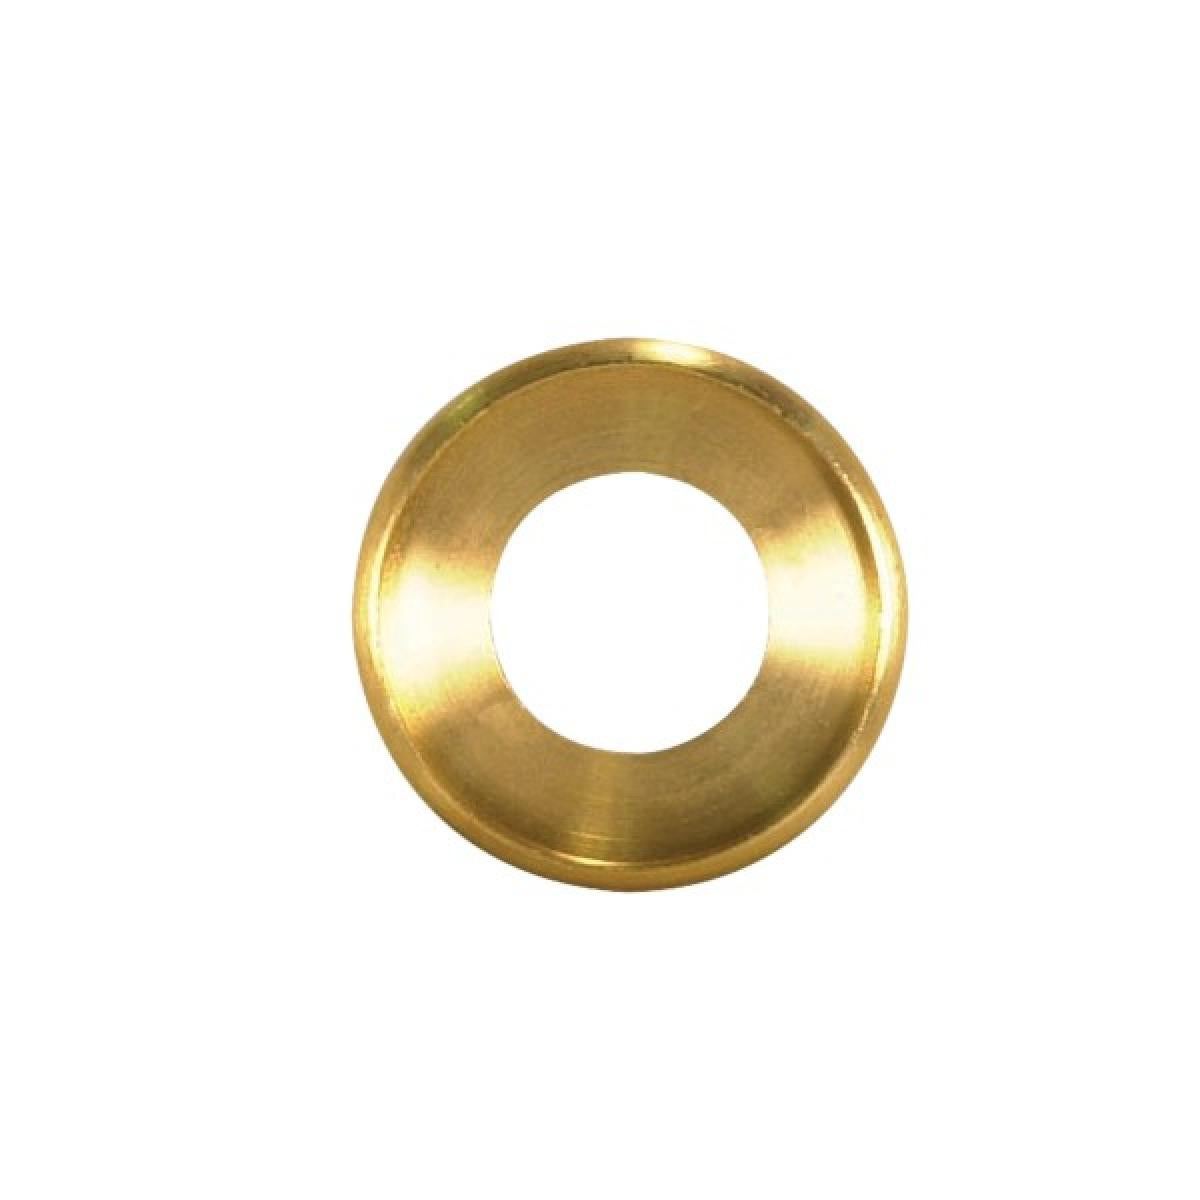 Satco 90-1613 Turned Brass Check Ring 1/4 IP Slip Unfinished 1-1/8" Diameter